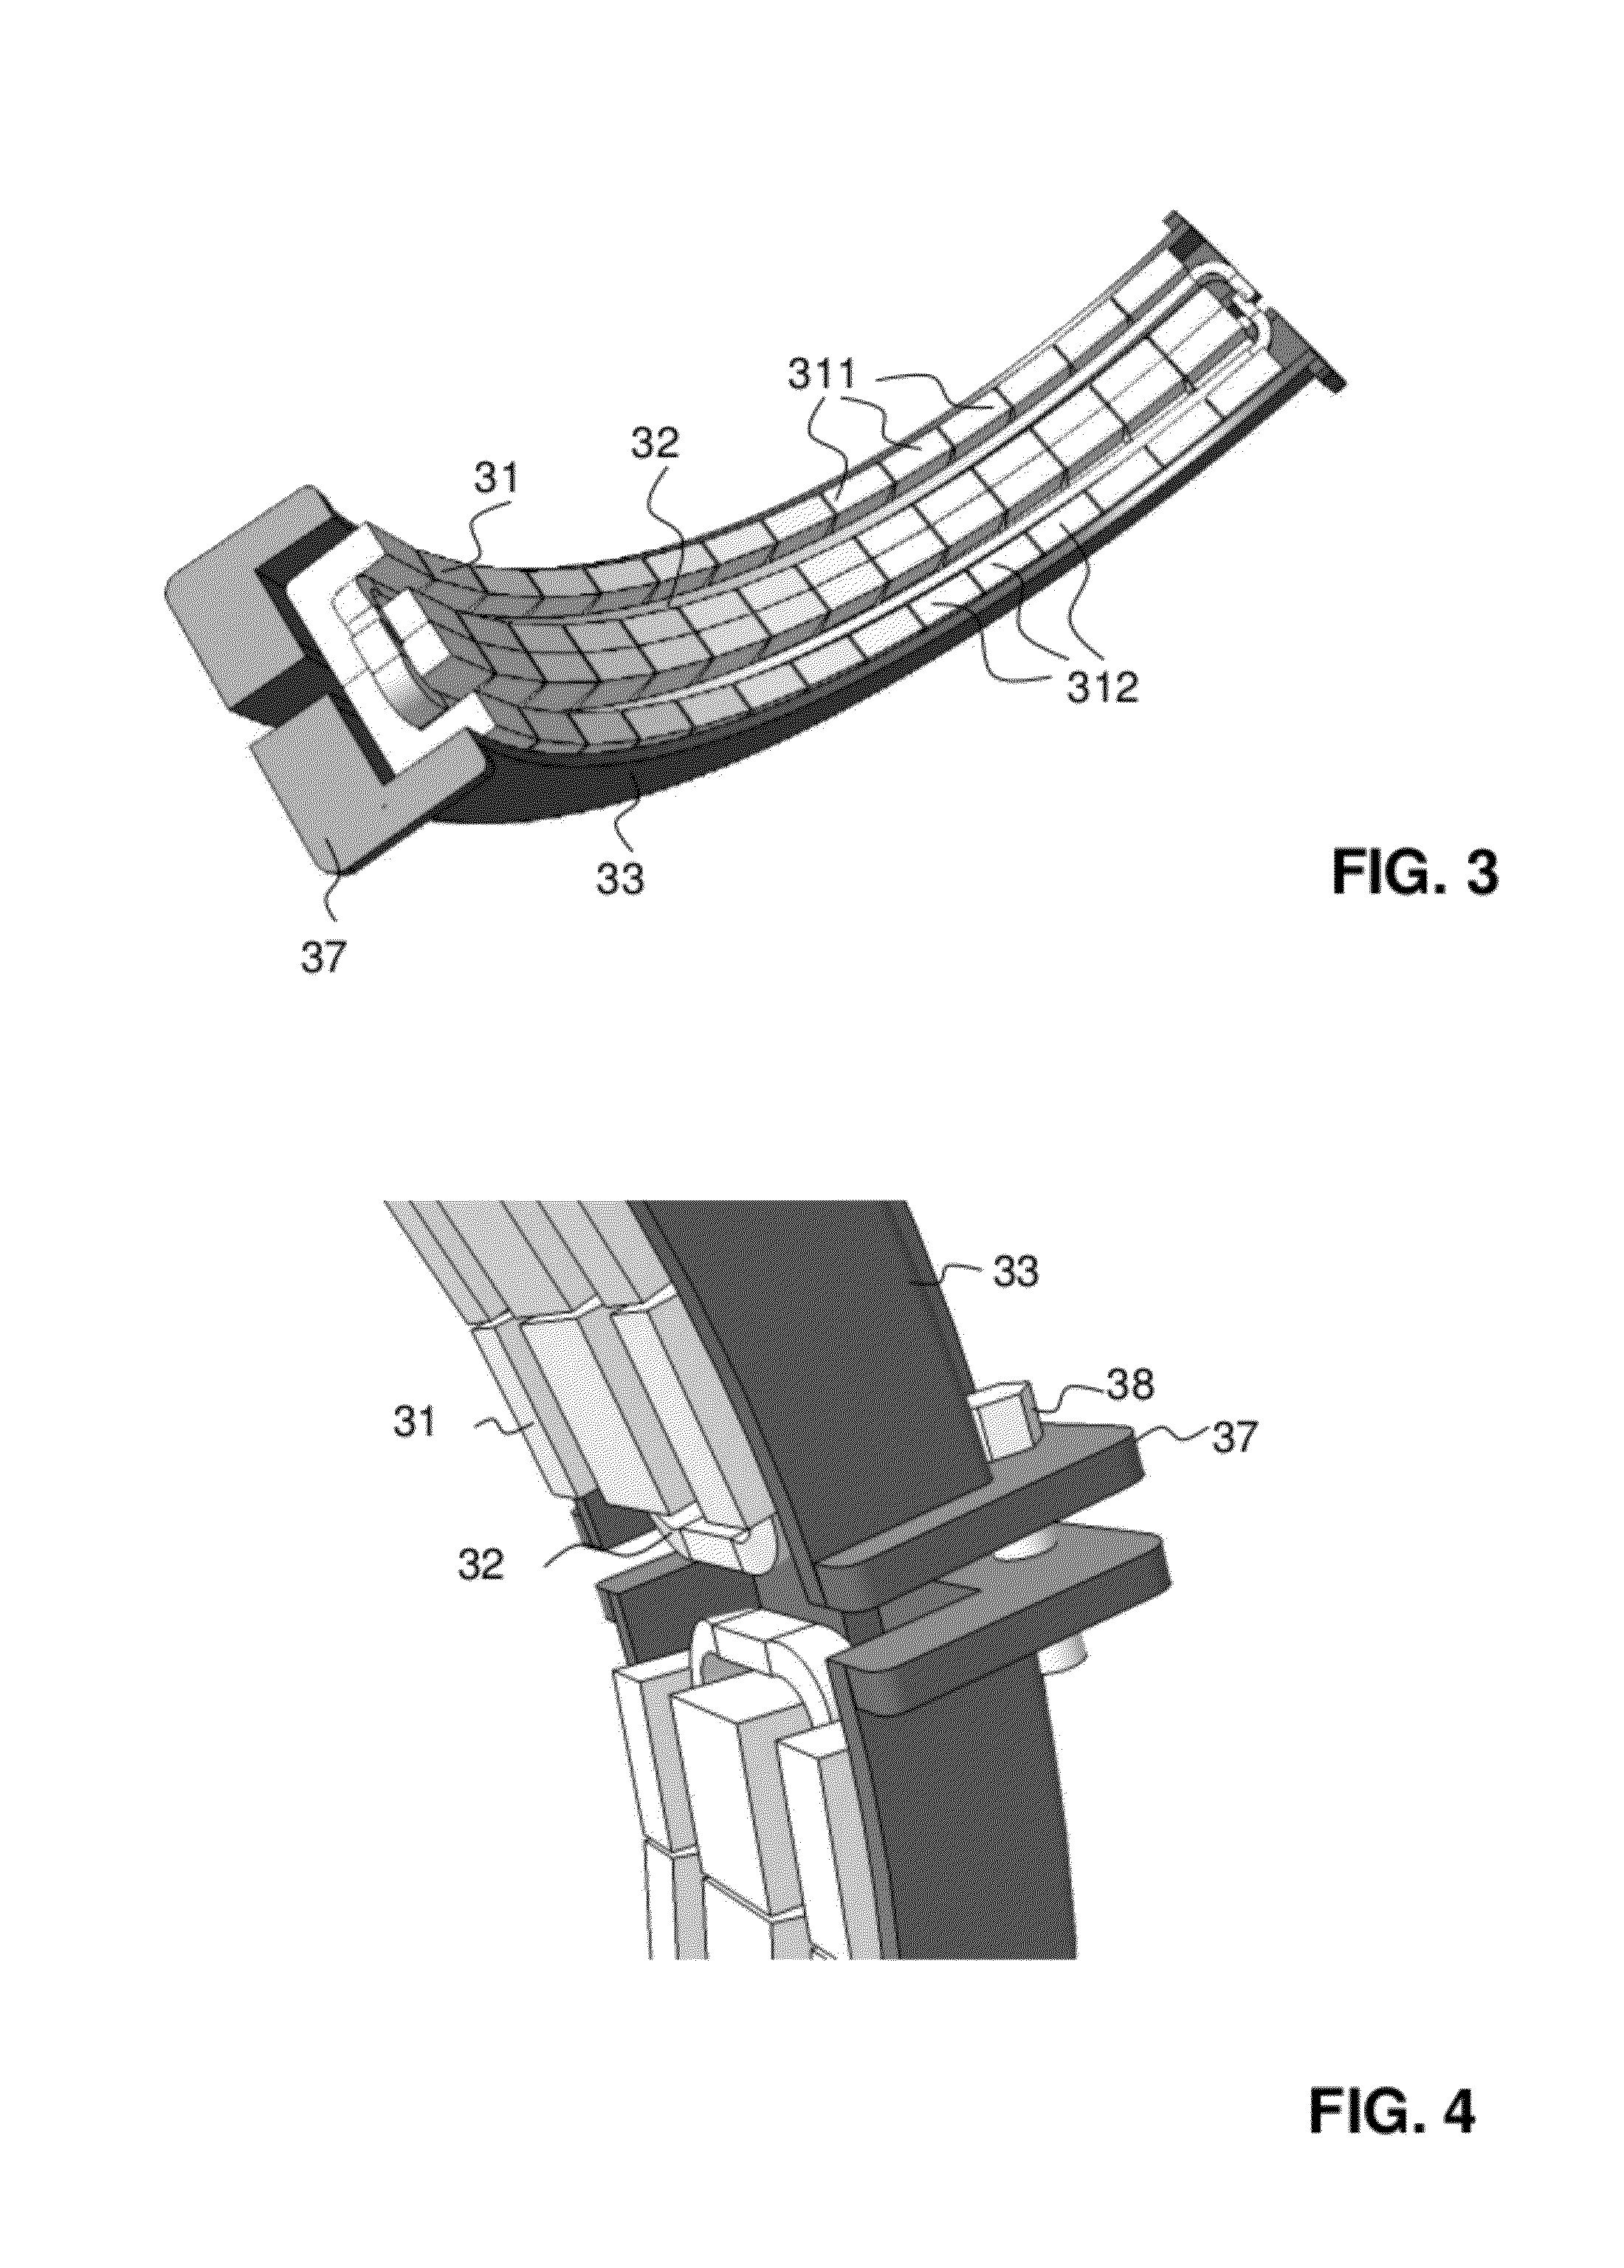 Rotating transformer for supplying the field winding in a dynamoelectric machine